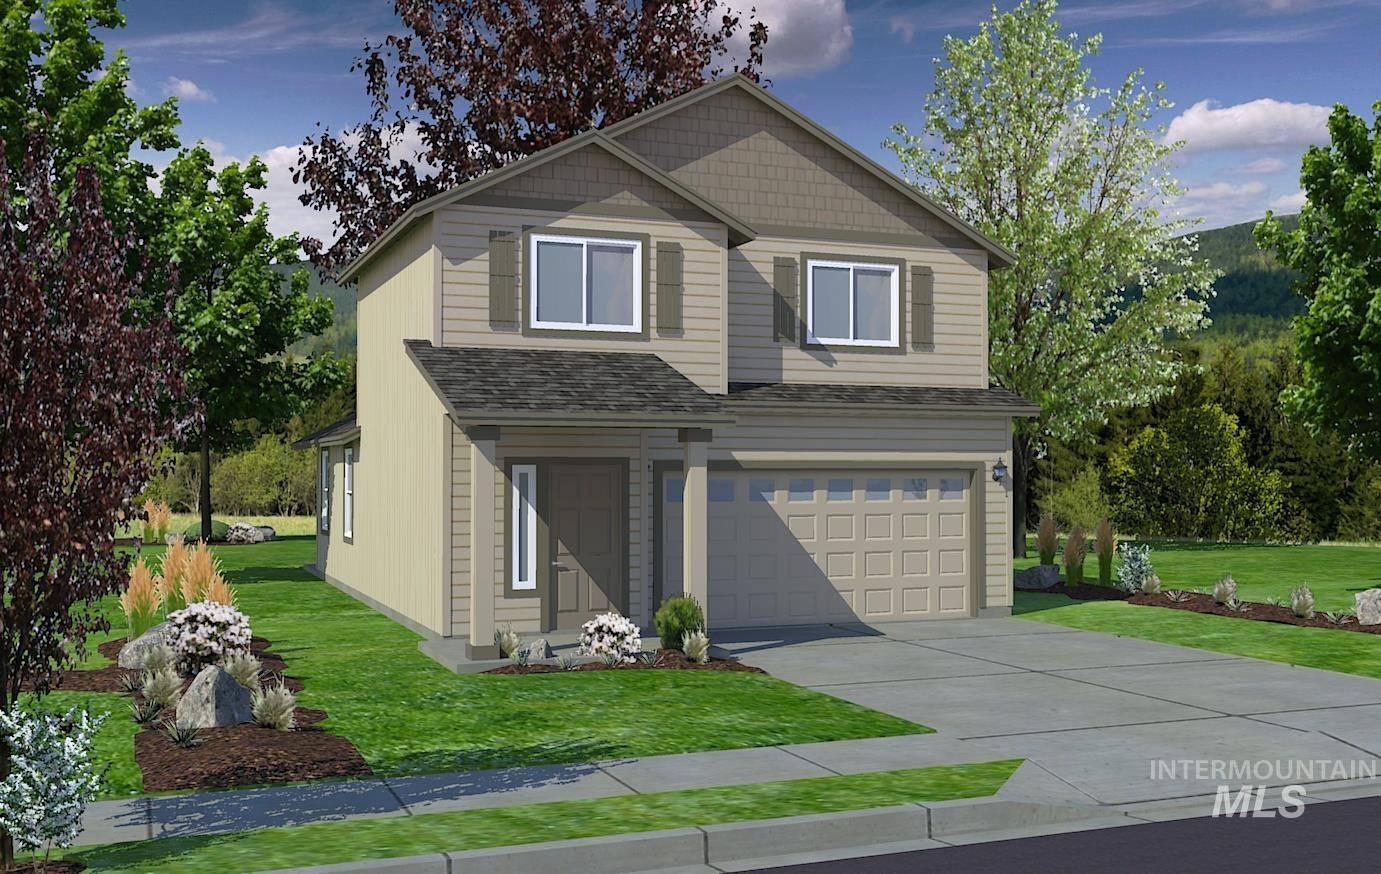 3002 Tannehill St., Caldwell, Idaho 83605, 3 Bedrooms, 2.5 Bathrooms, Residential For Sale, Price $379,990,MLS 98901112